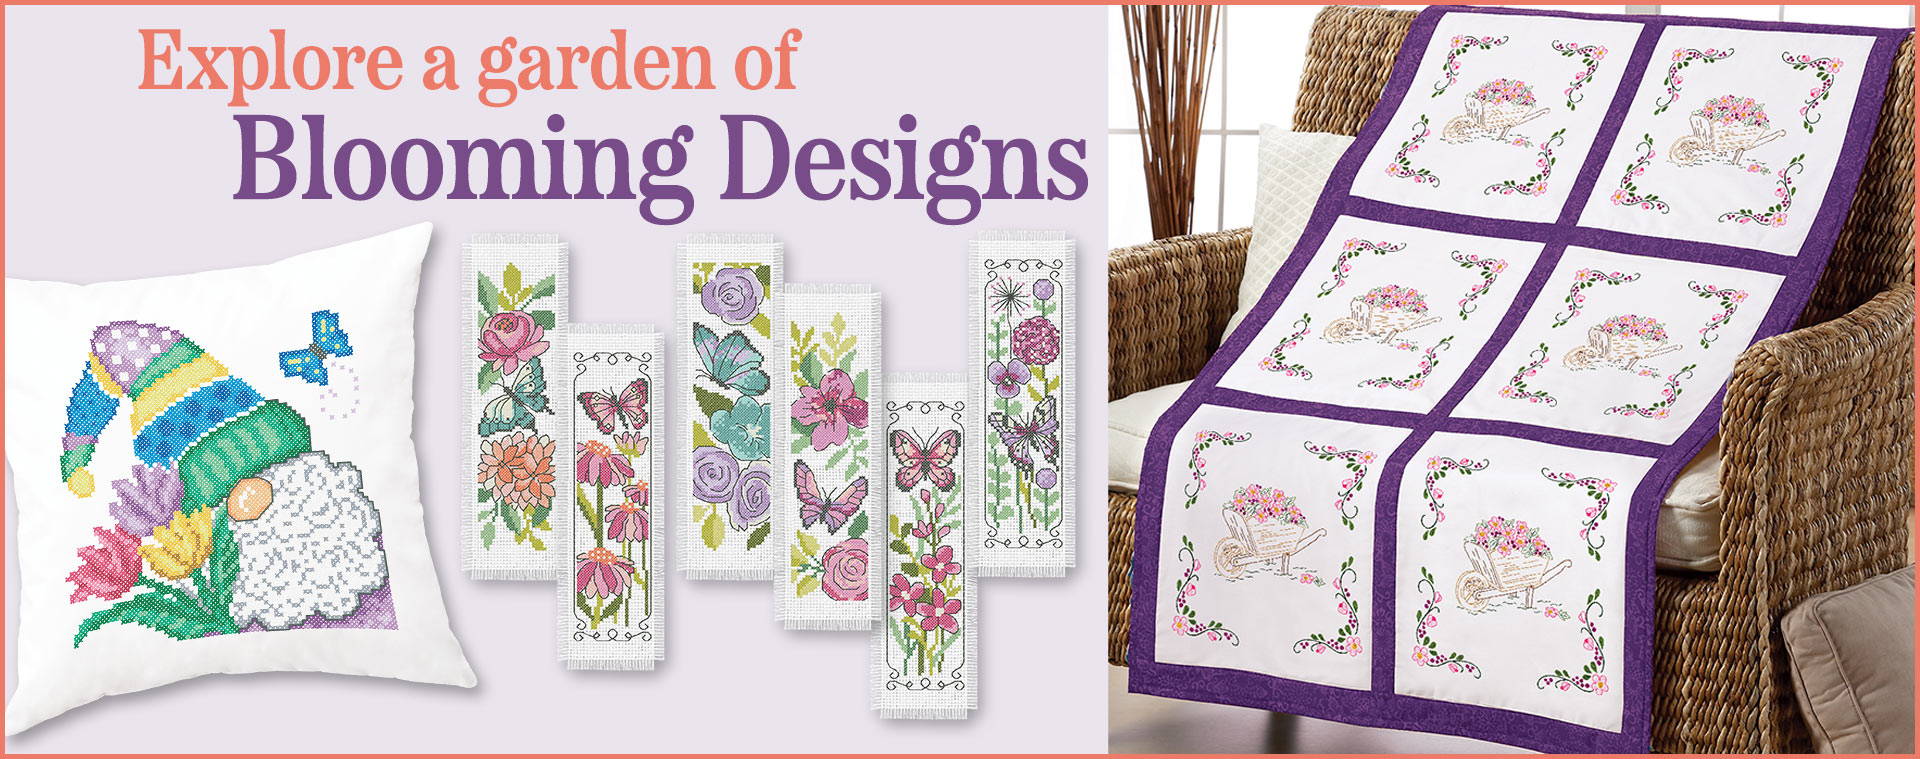 Explore a garden of blooming designs. Image: Featured needlework projects.